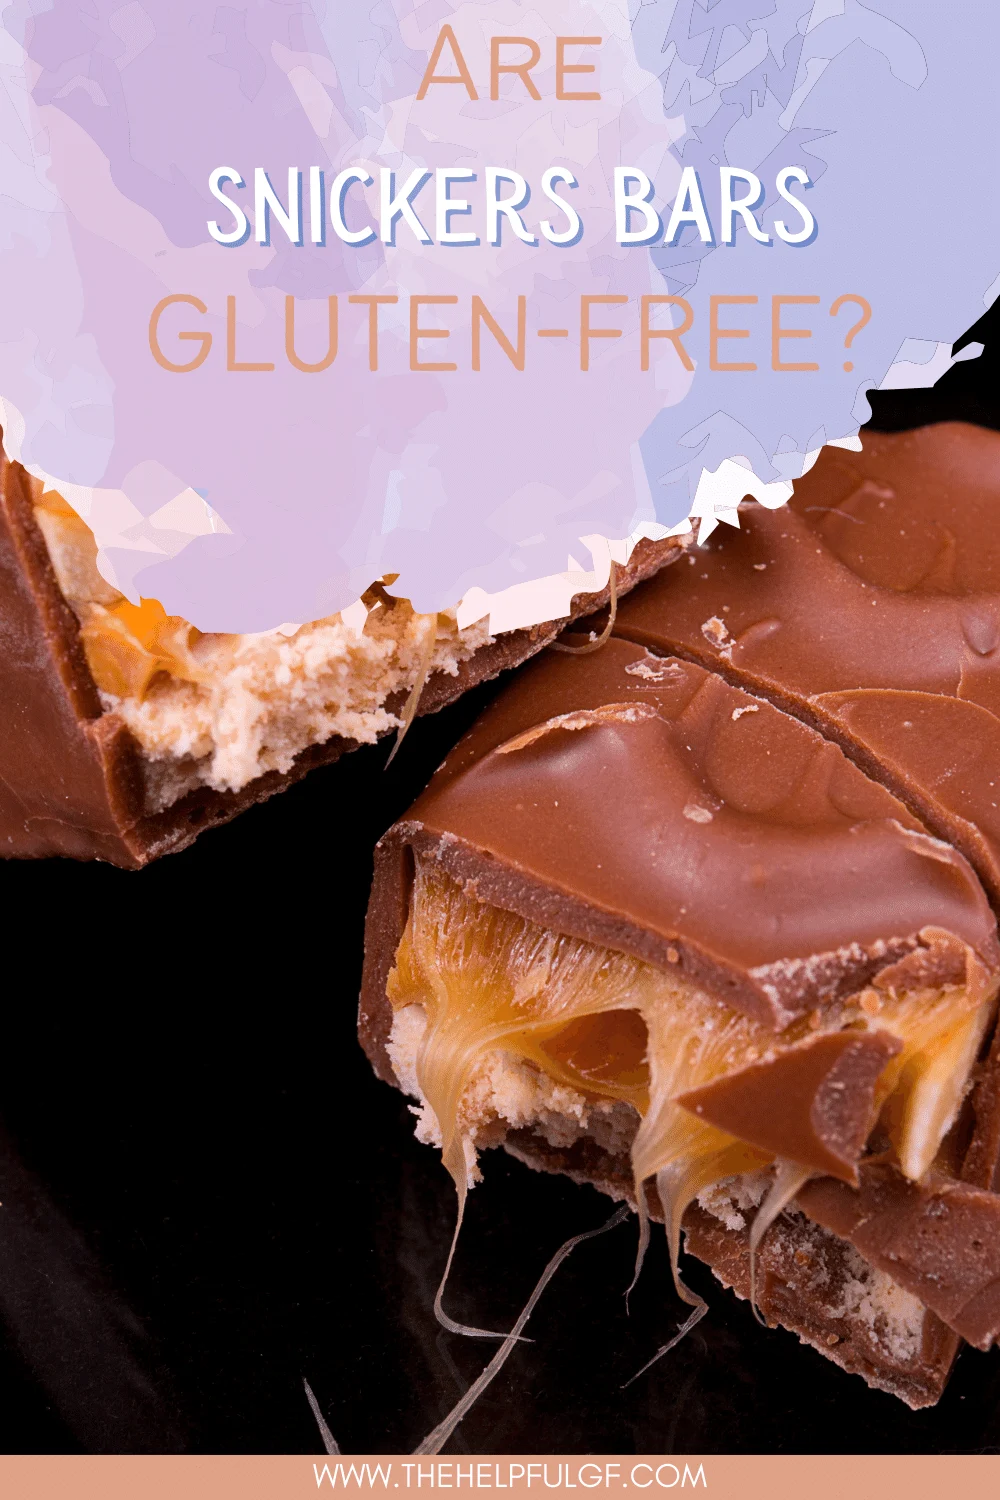 Pin Image with half a snickers bar with the text "are snickers bars gluten-free?"